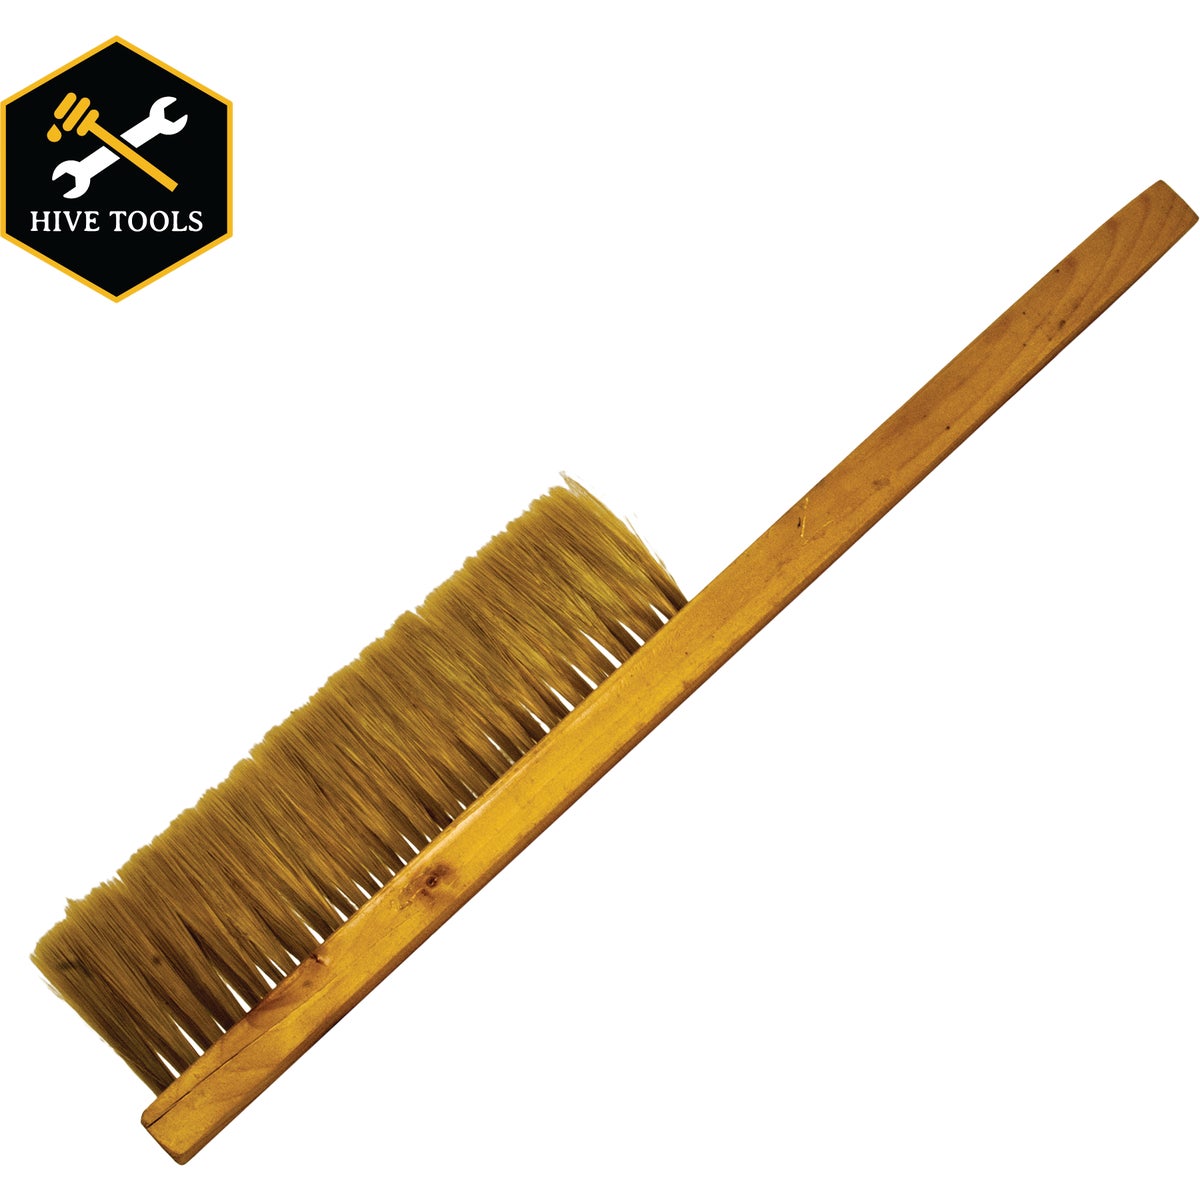 Item 704049, Standard bee brush features a wooden handle with fiber bristles.